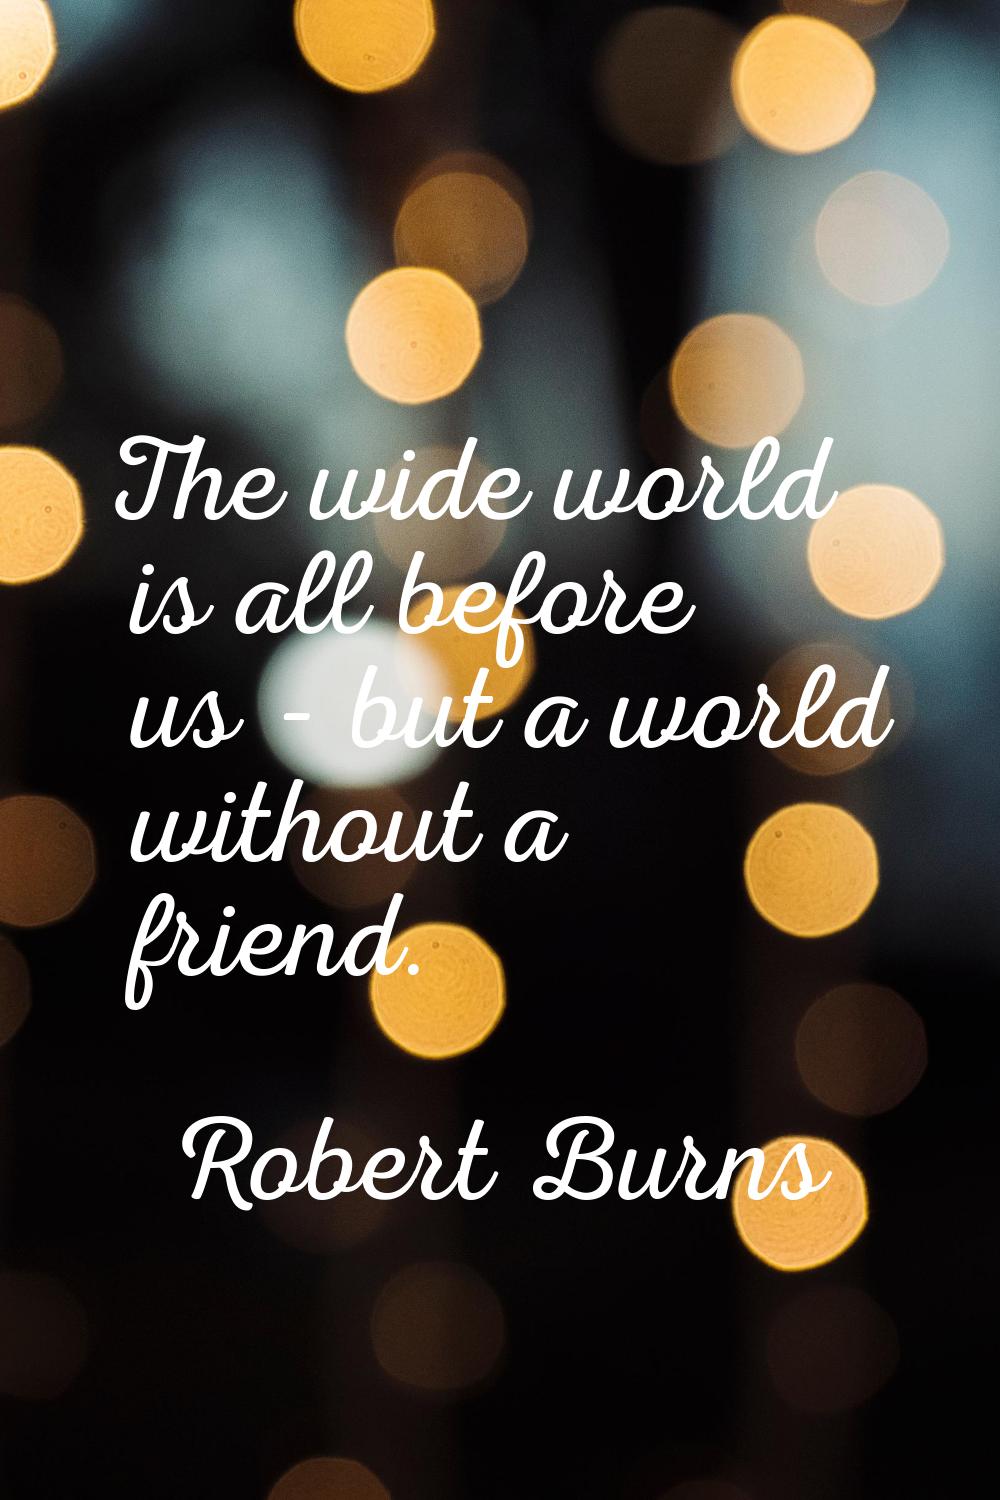 The wide world is all before us - but a world without a friend.